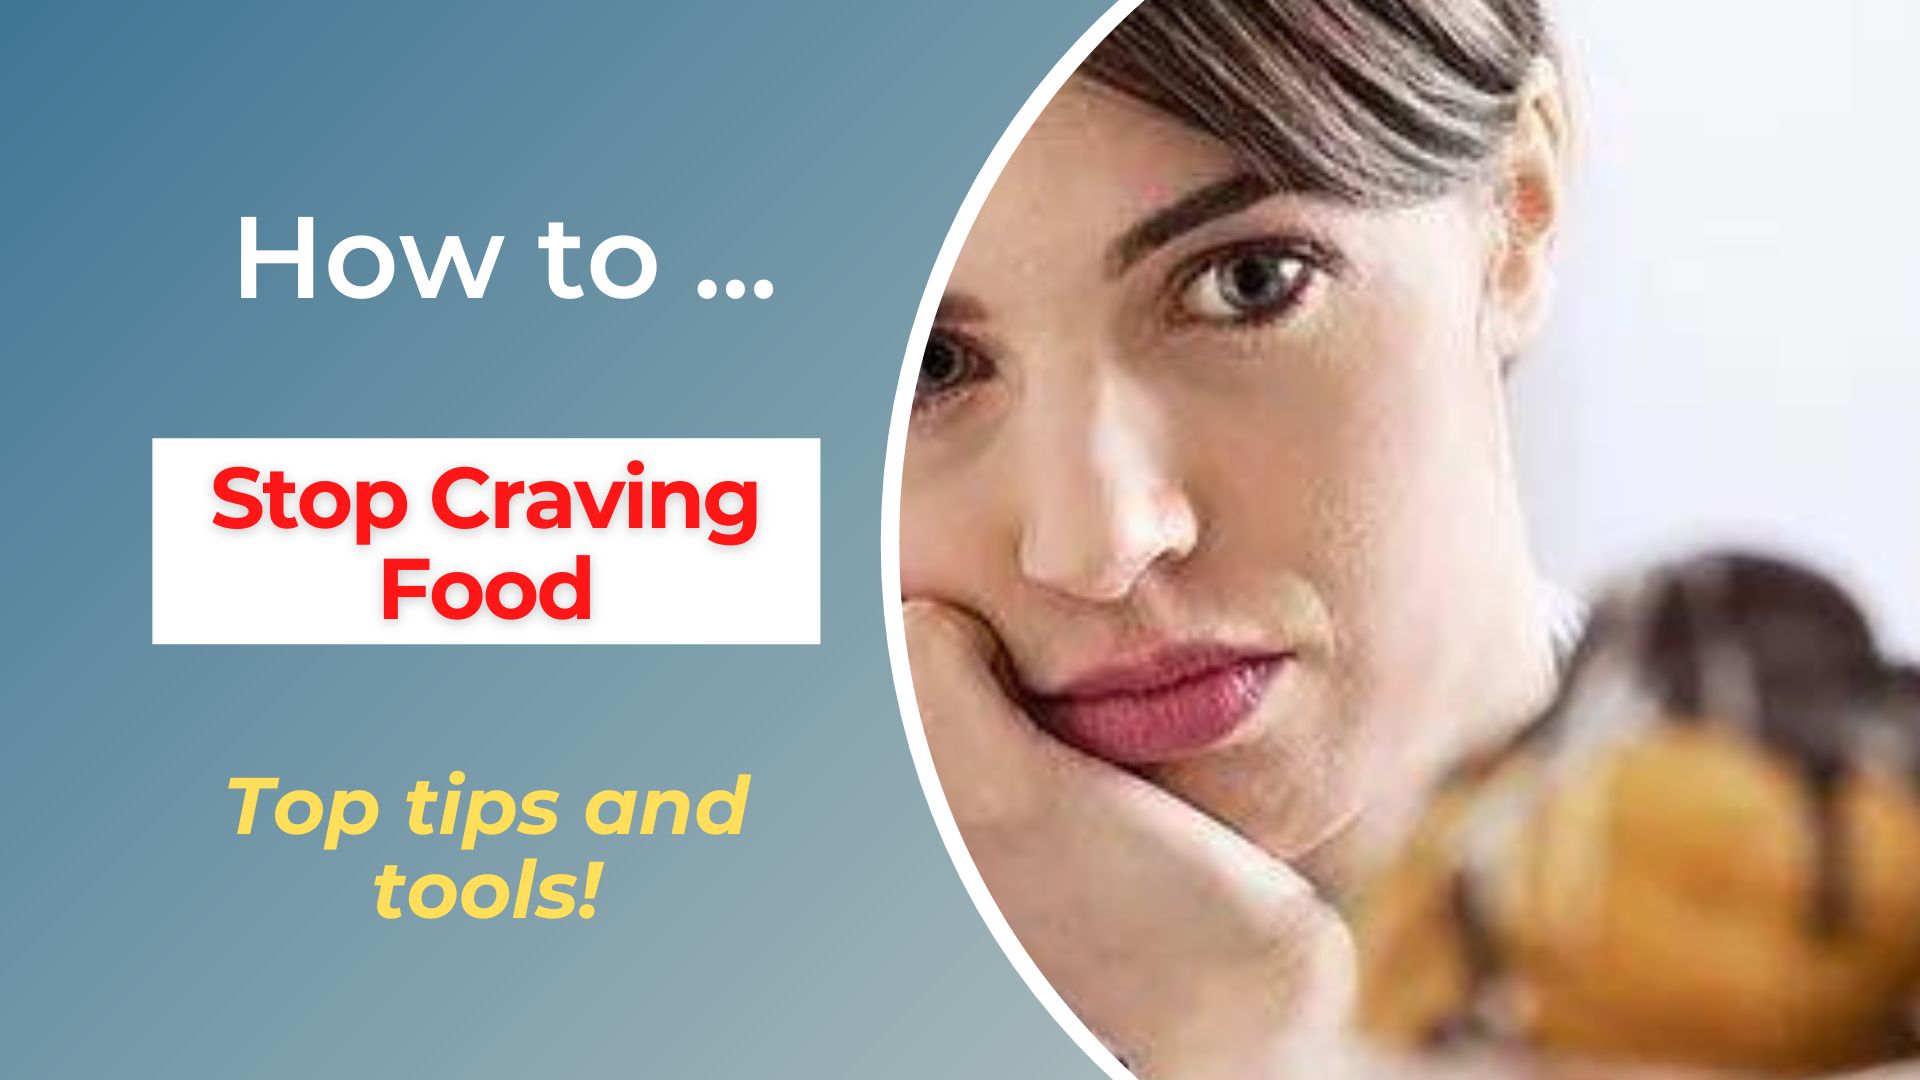 How to Stop Craving Food